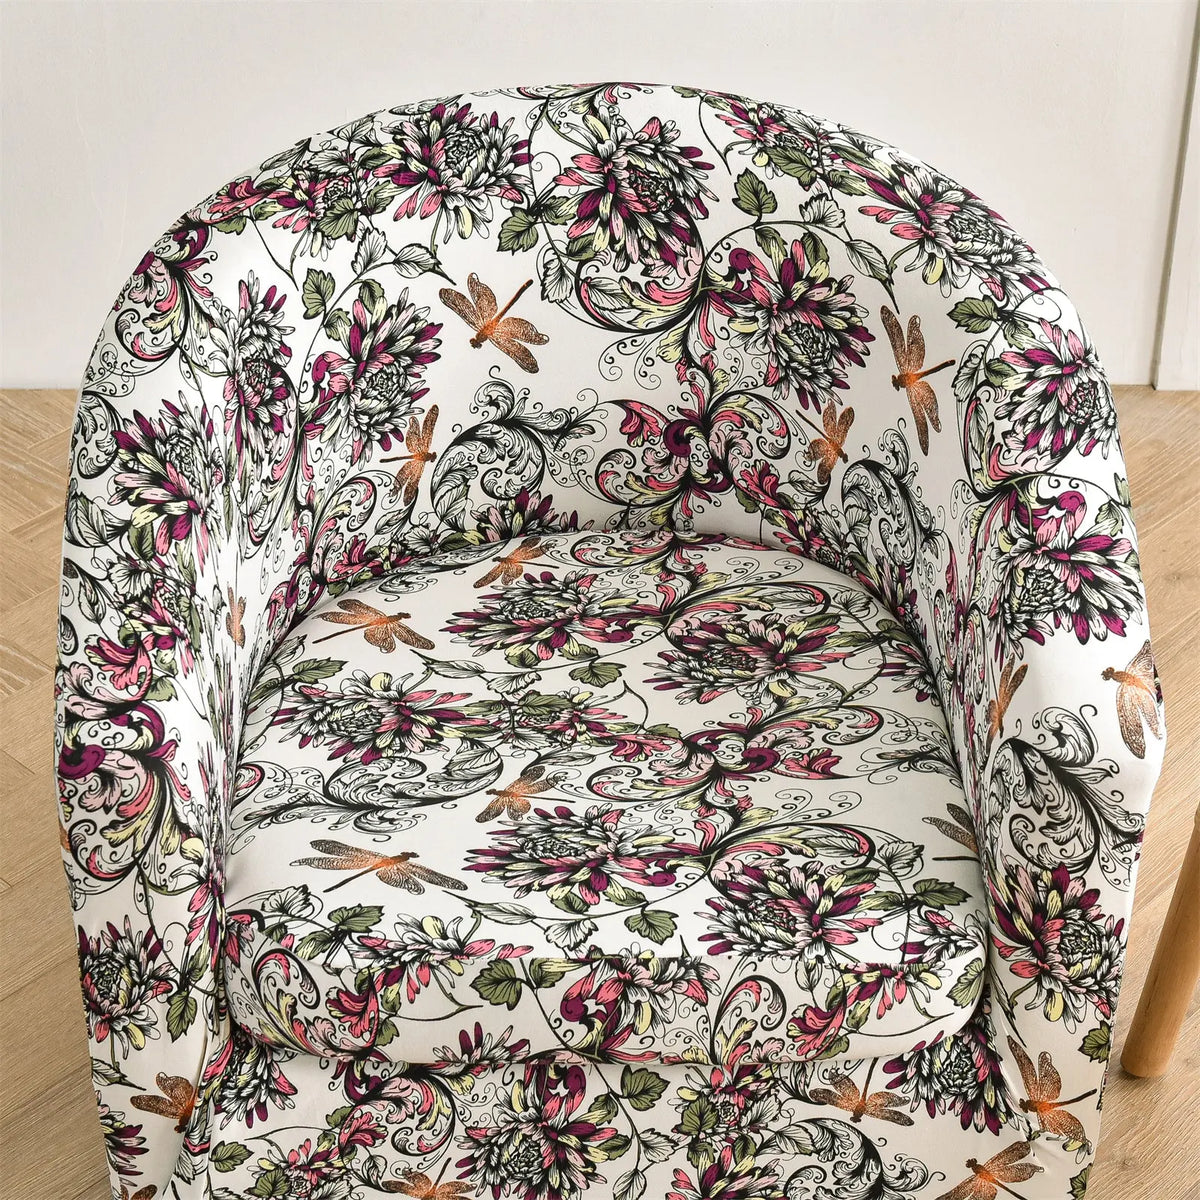 Pretty Floral Printing Club Armchair Cover Washable Waterproof Furniture Protector Slipcovers Crfatop %sku%